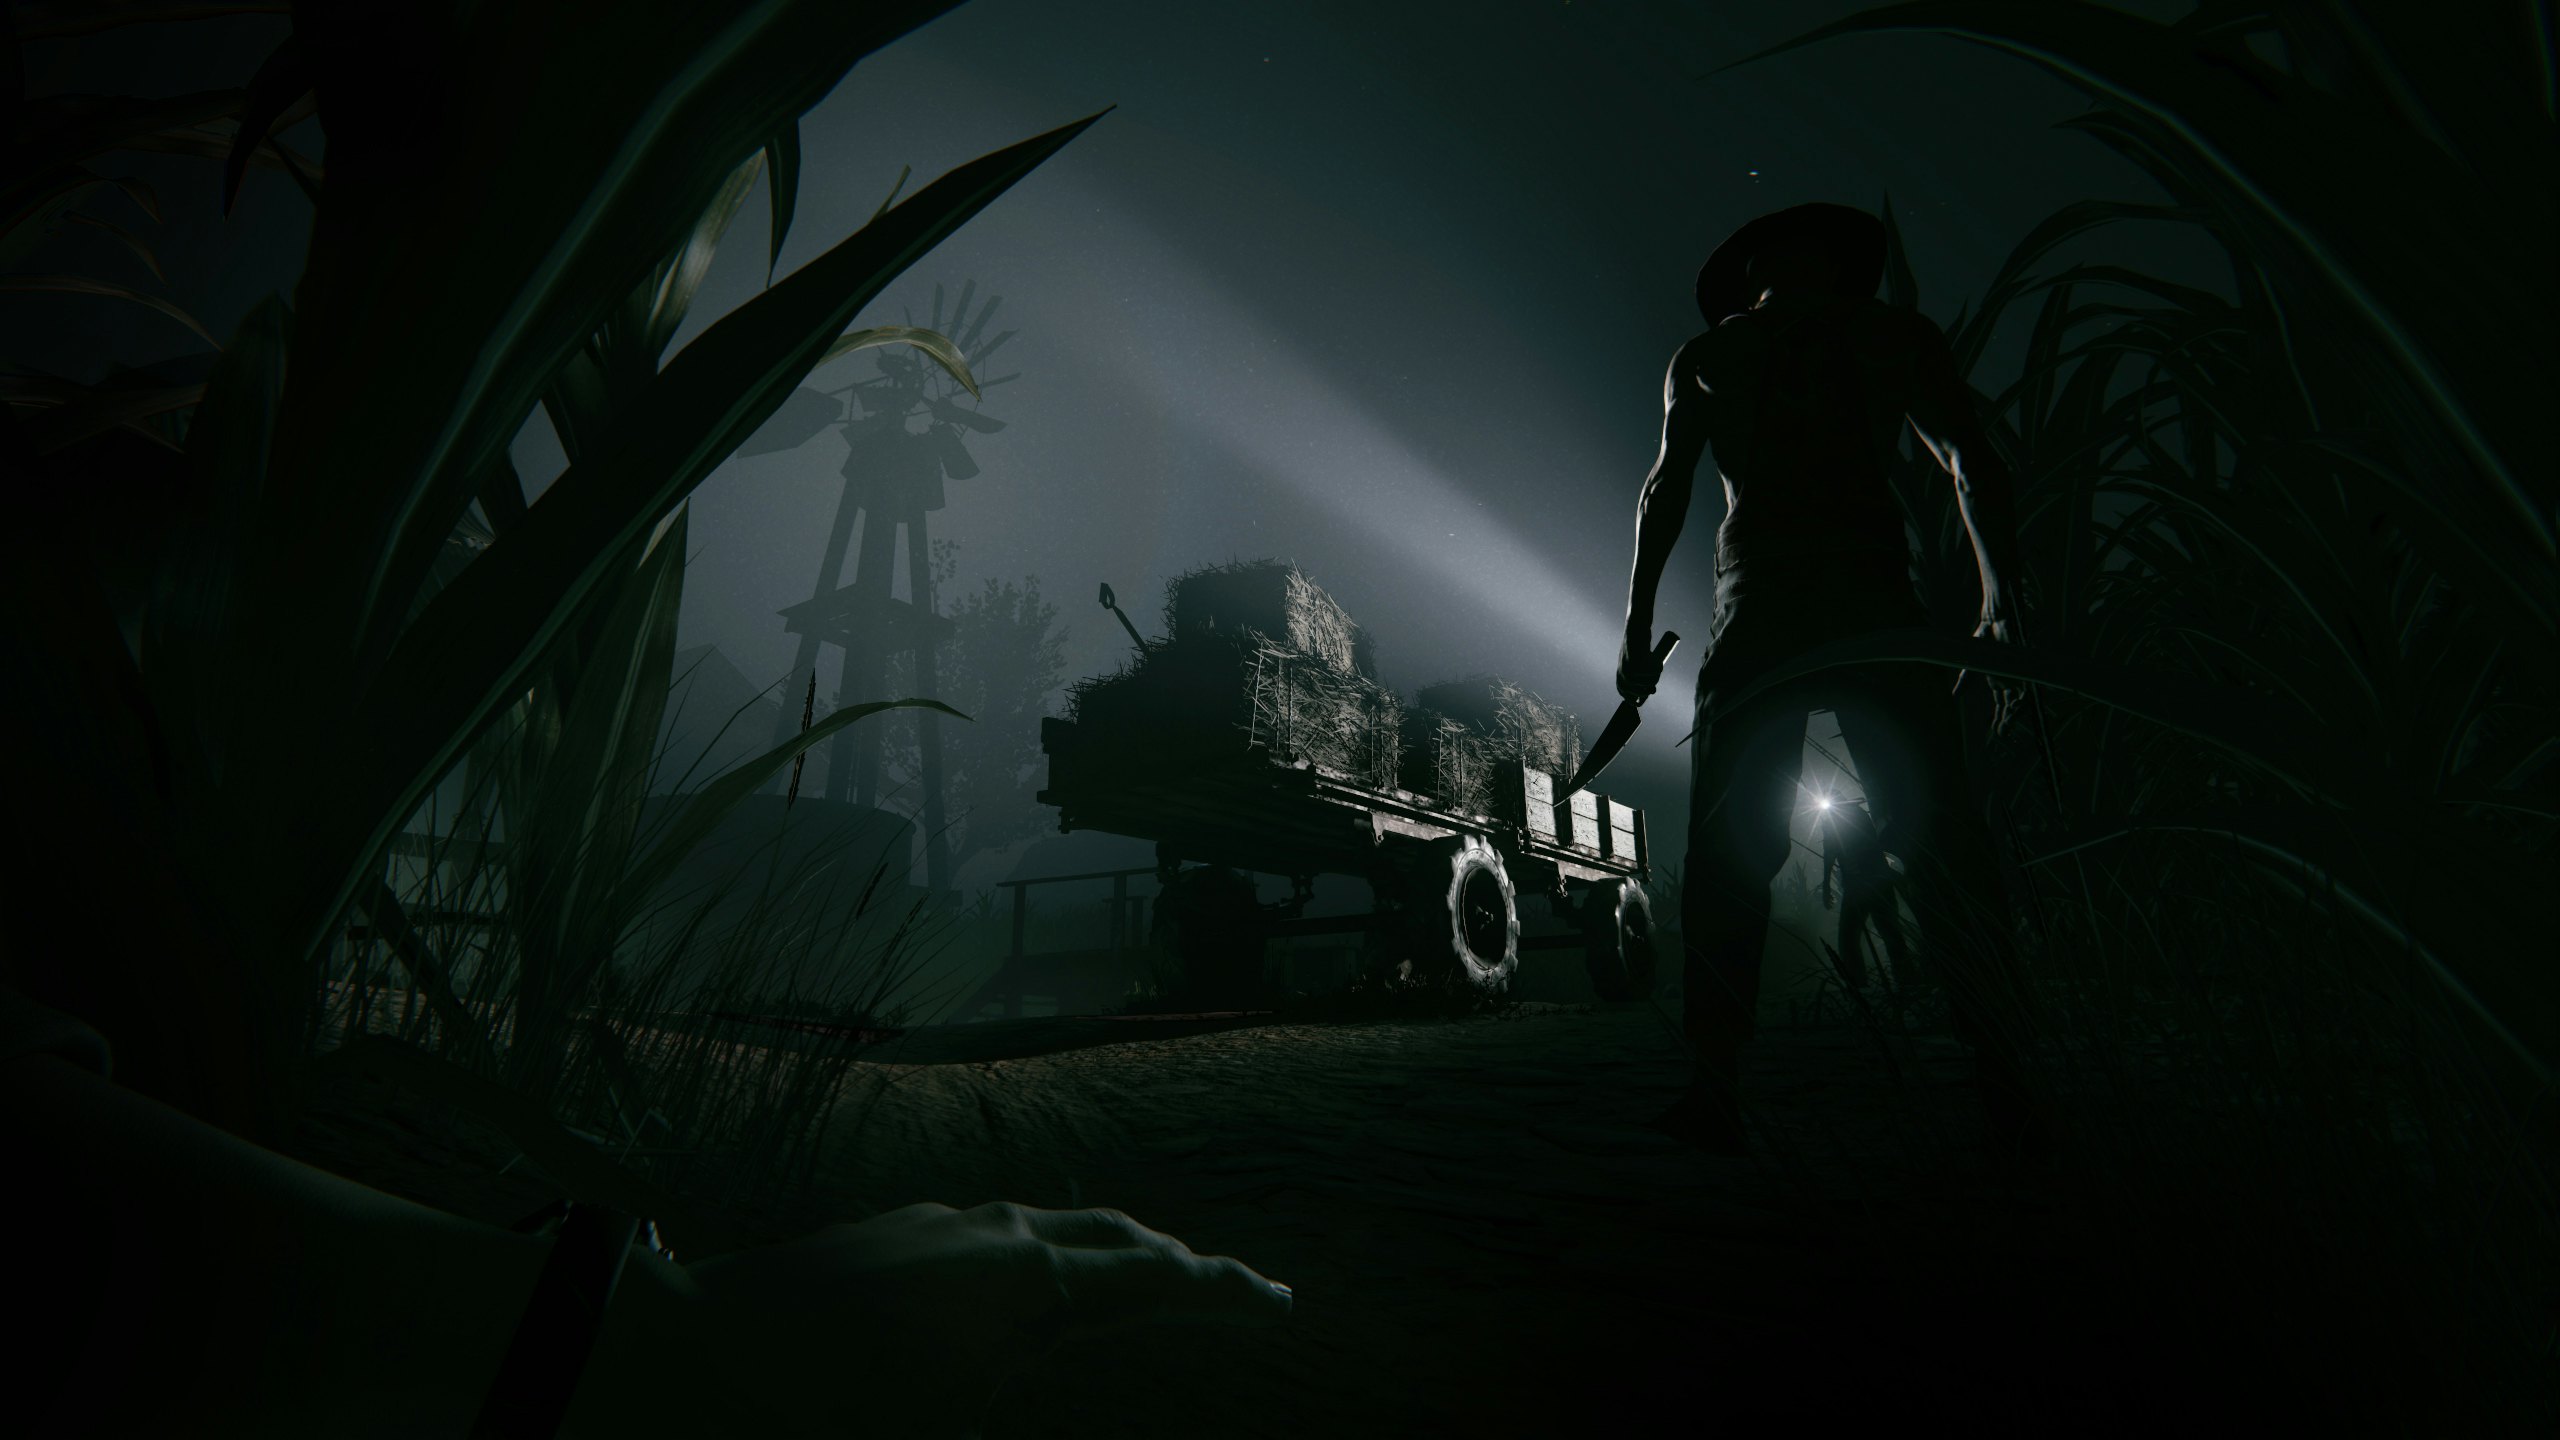 outlast ps4 vr download free